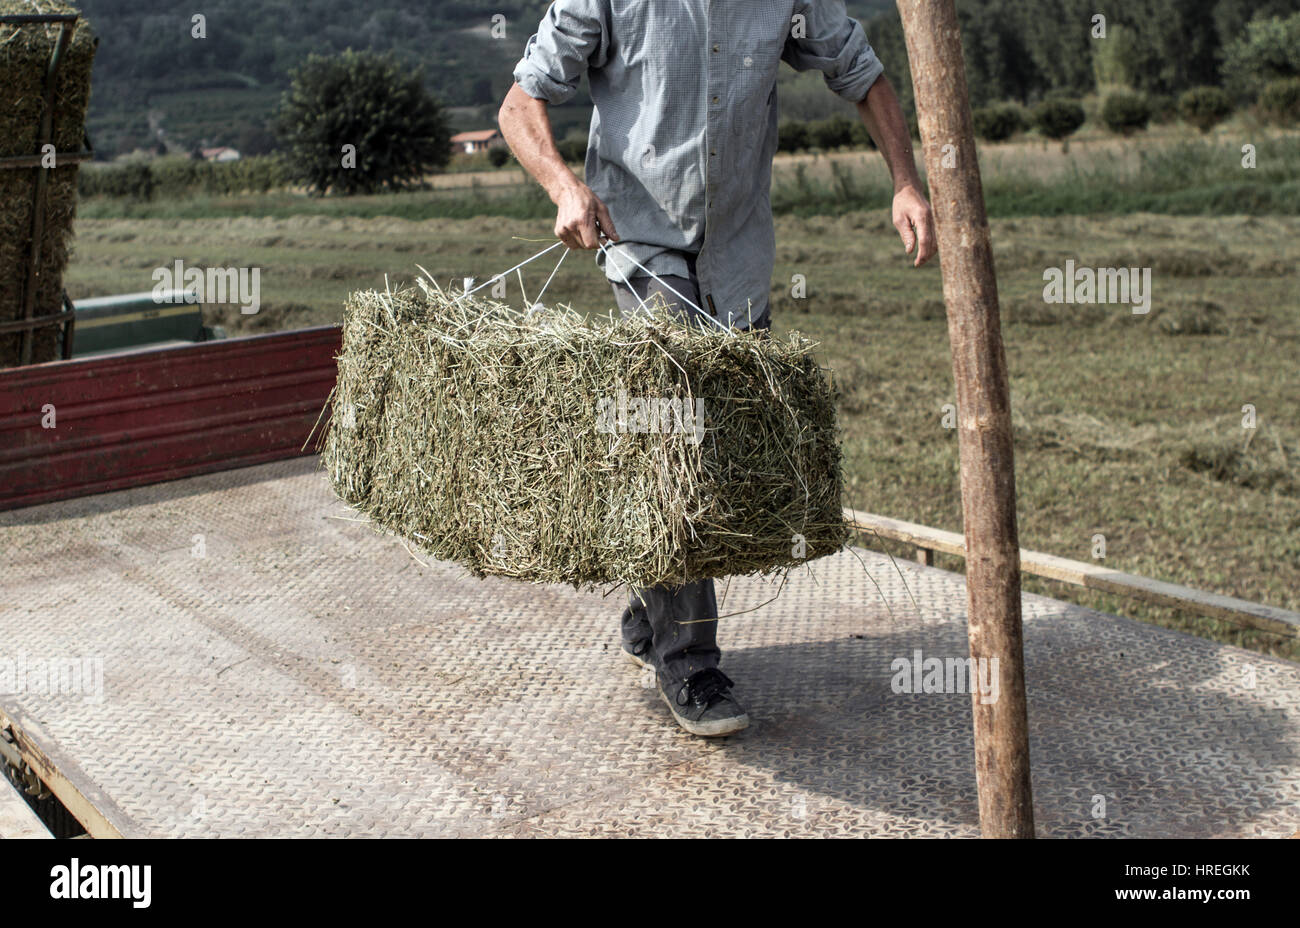 Man harvesting hay in Magliano Alfieri, which is located in the province of Piedmont, Italy. Stock Photo